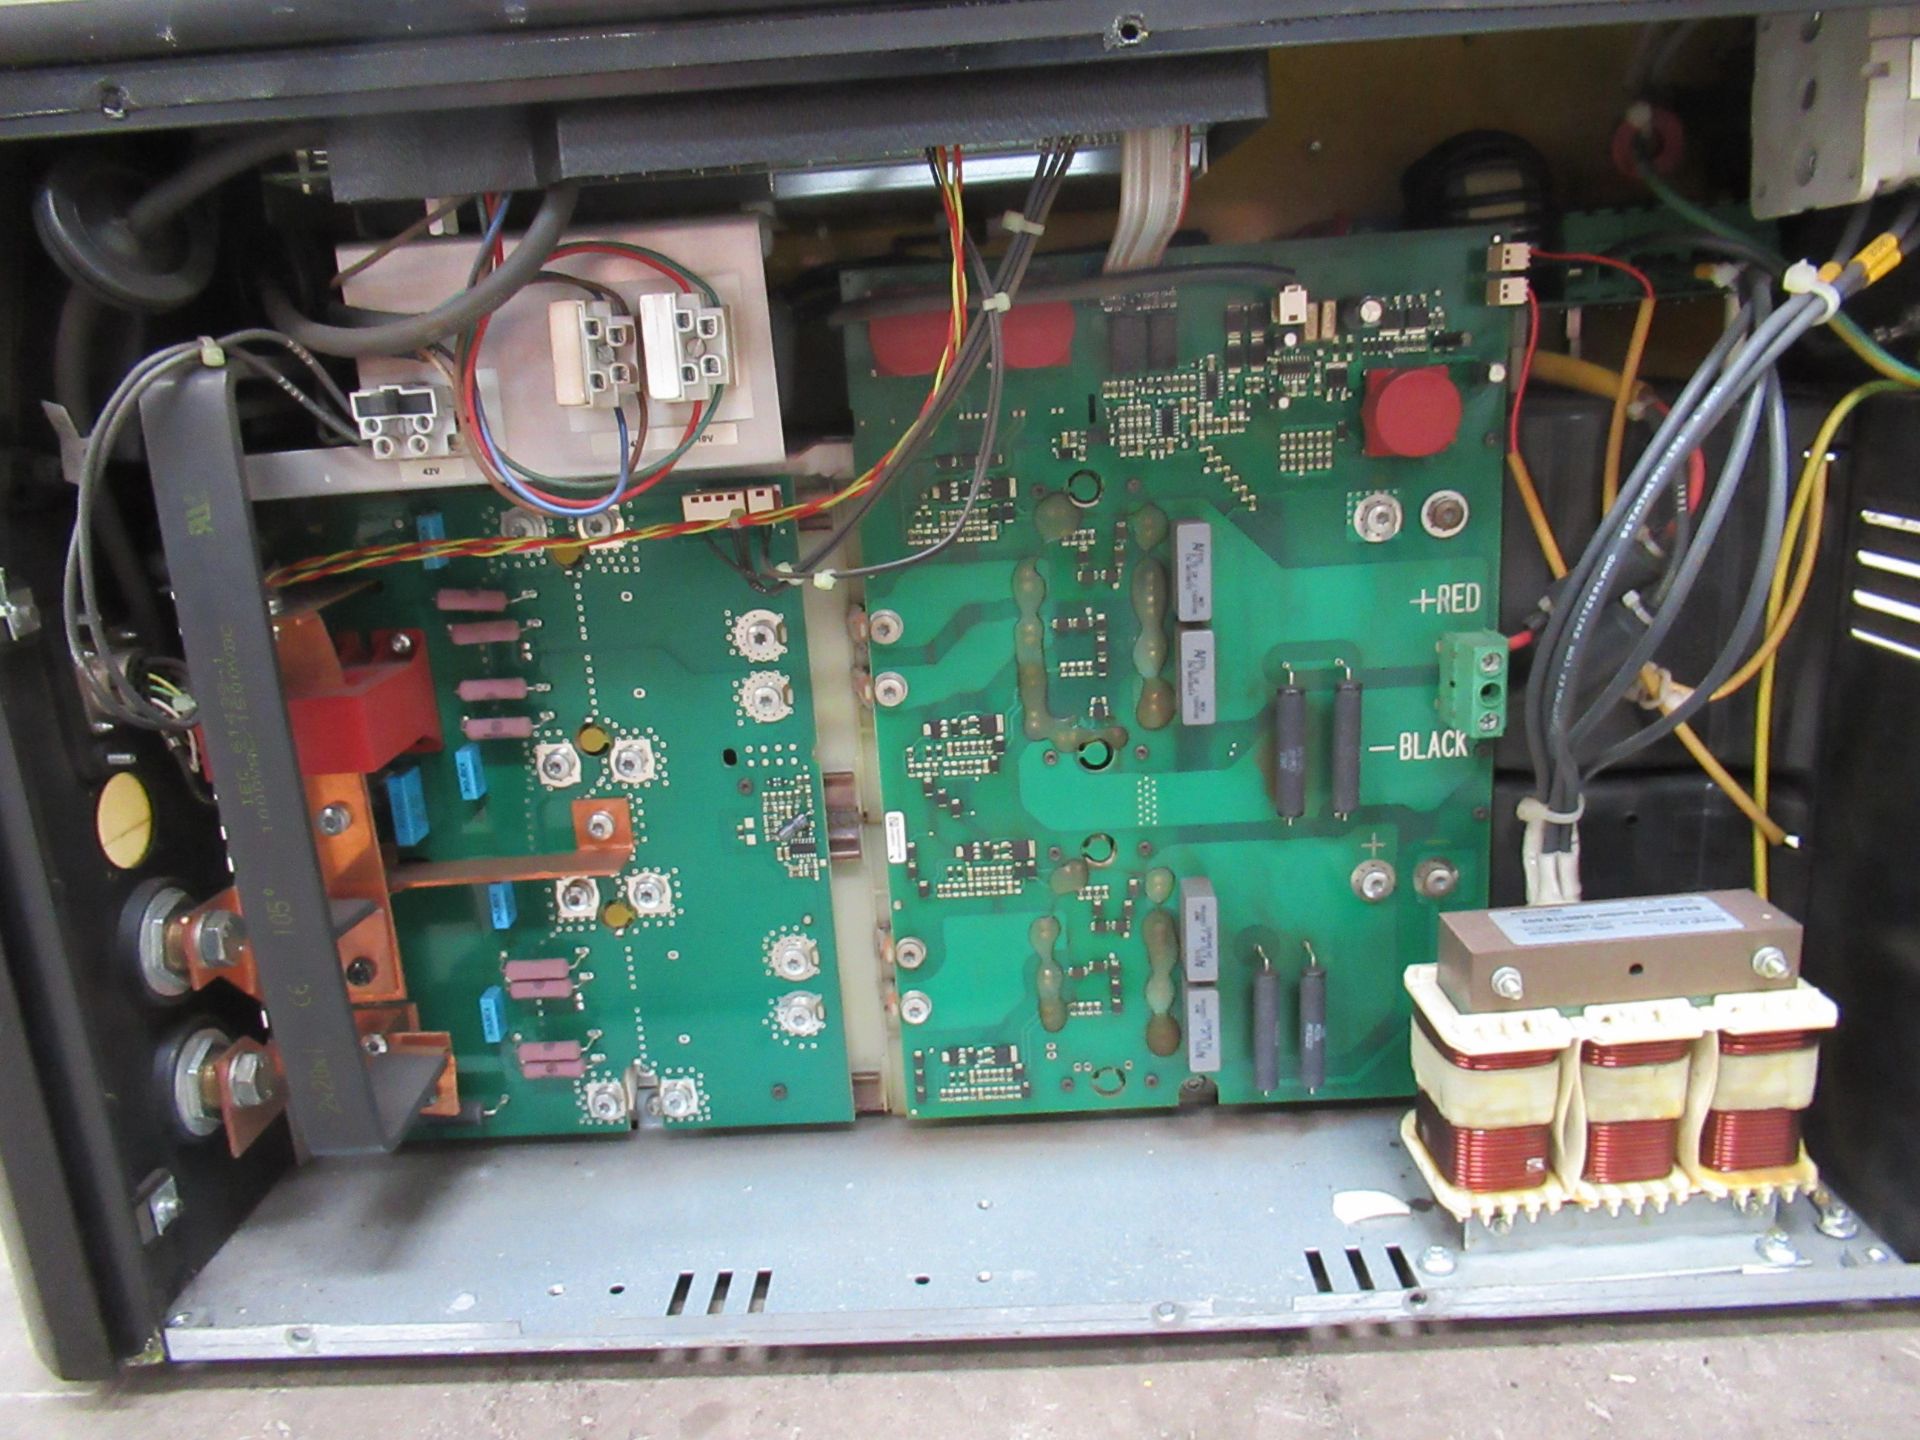 E5aB MiG C3000i Aristo MiG welder and built in wire feed - Image 7 of 7